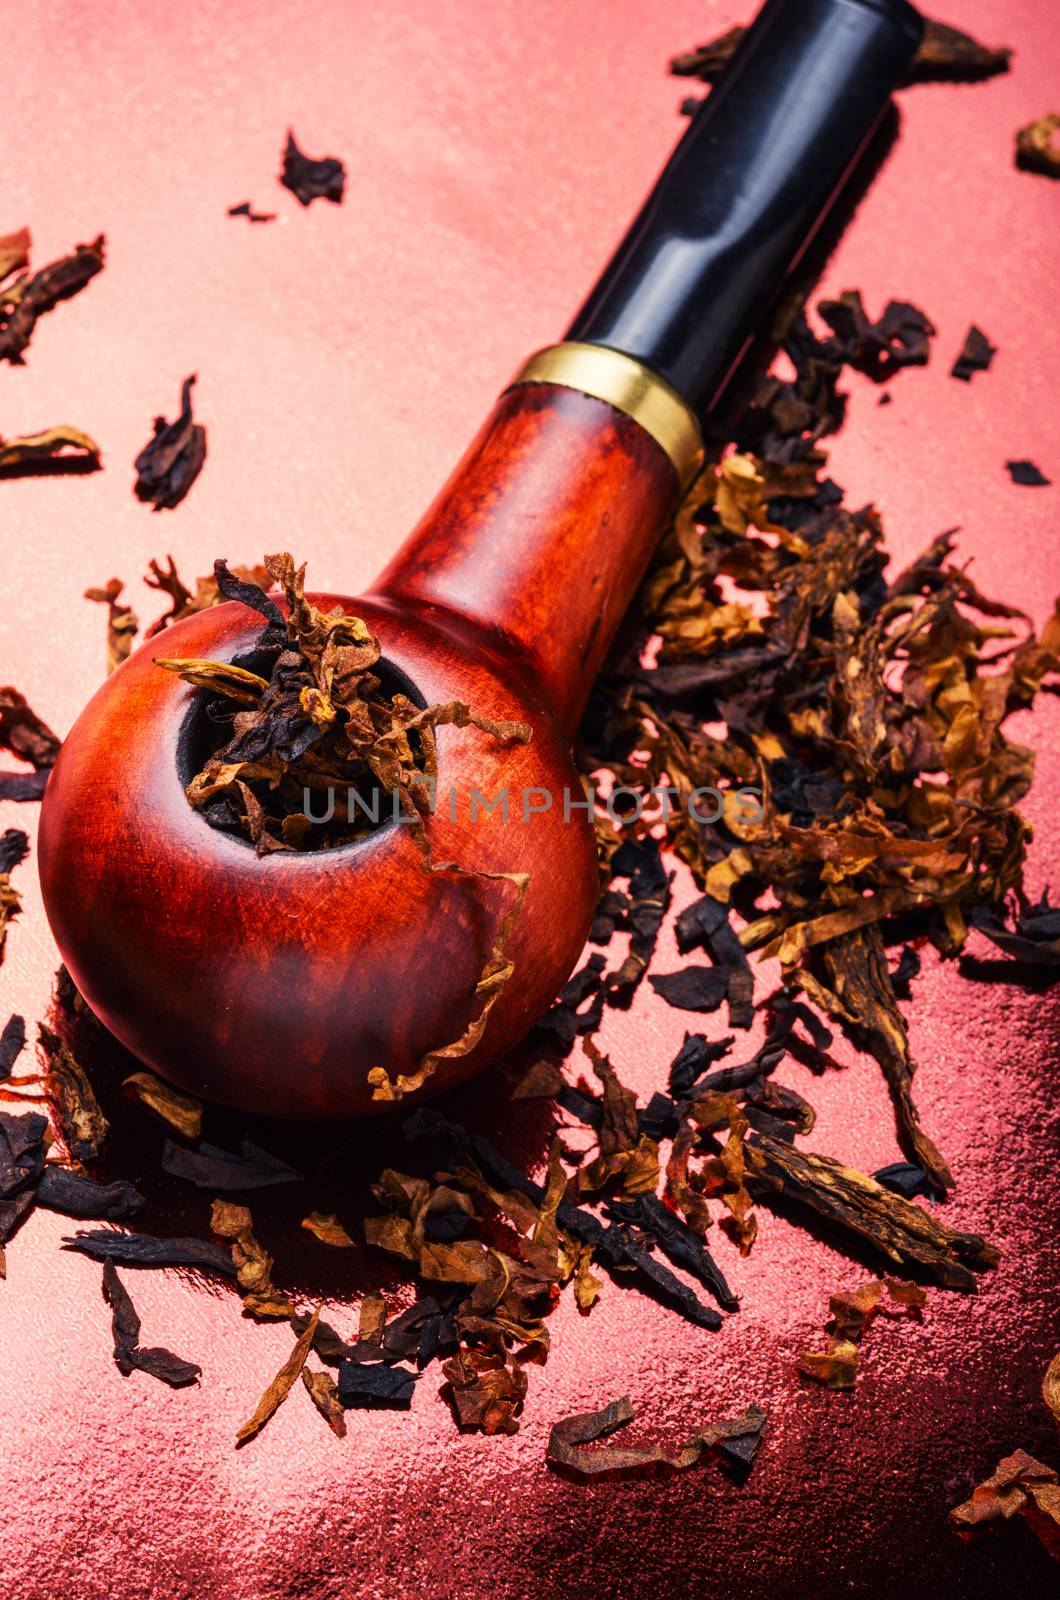 Tobacco pipe with tobacco and scattered virgin tobacco